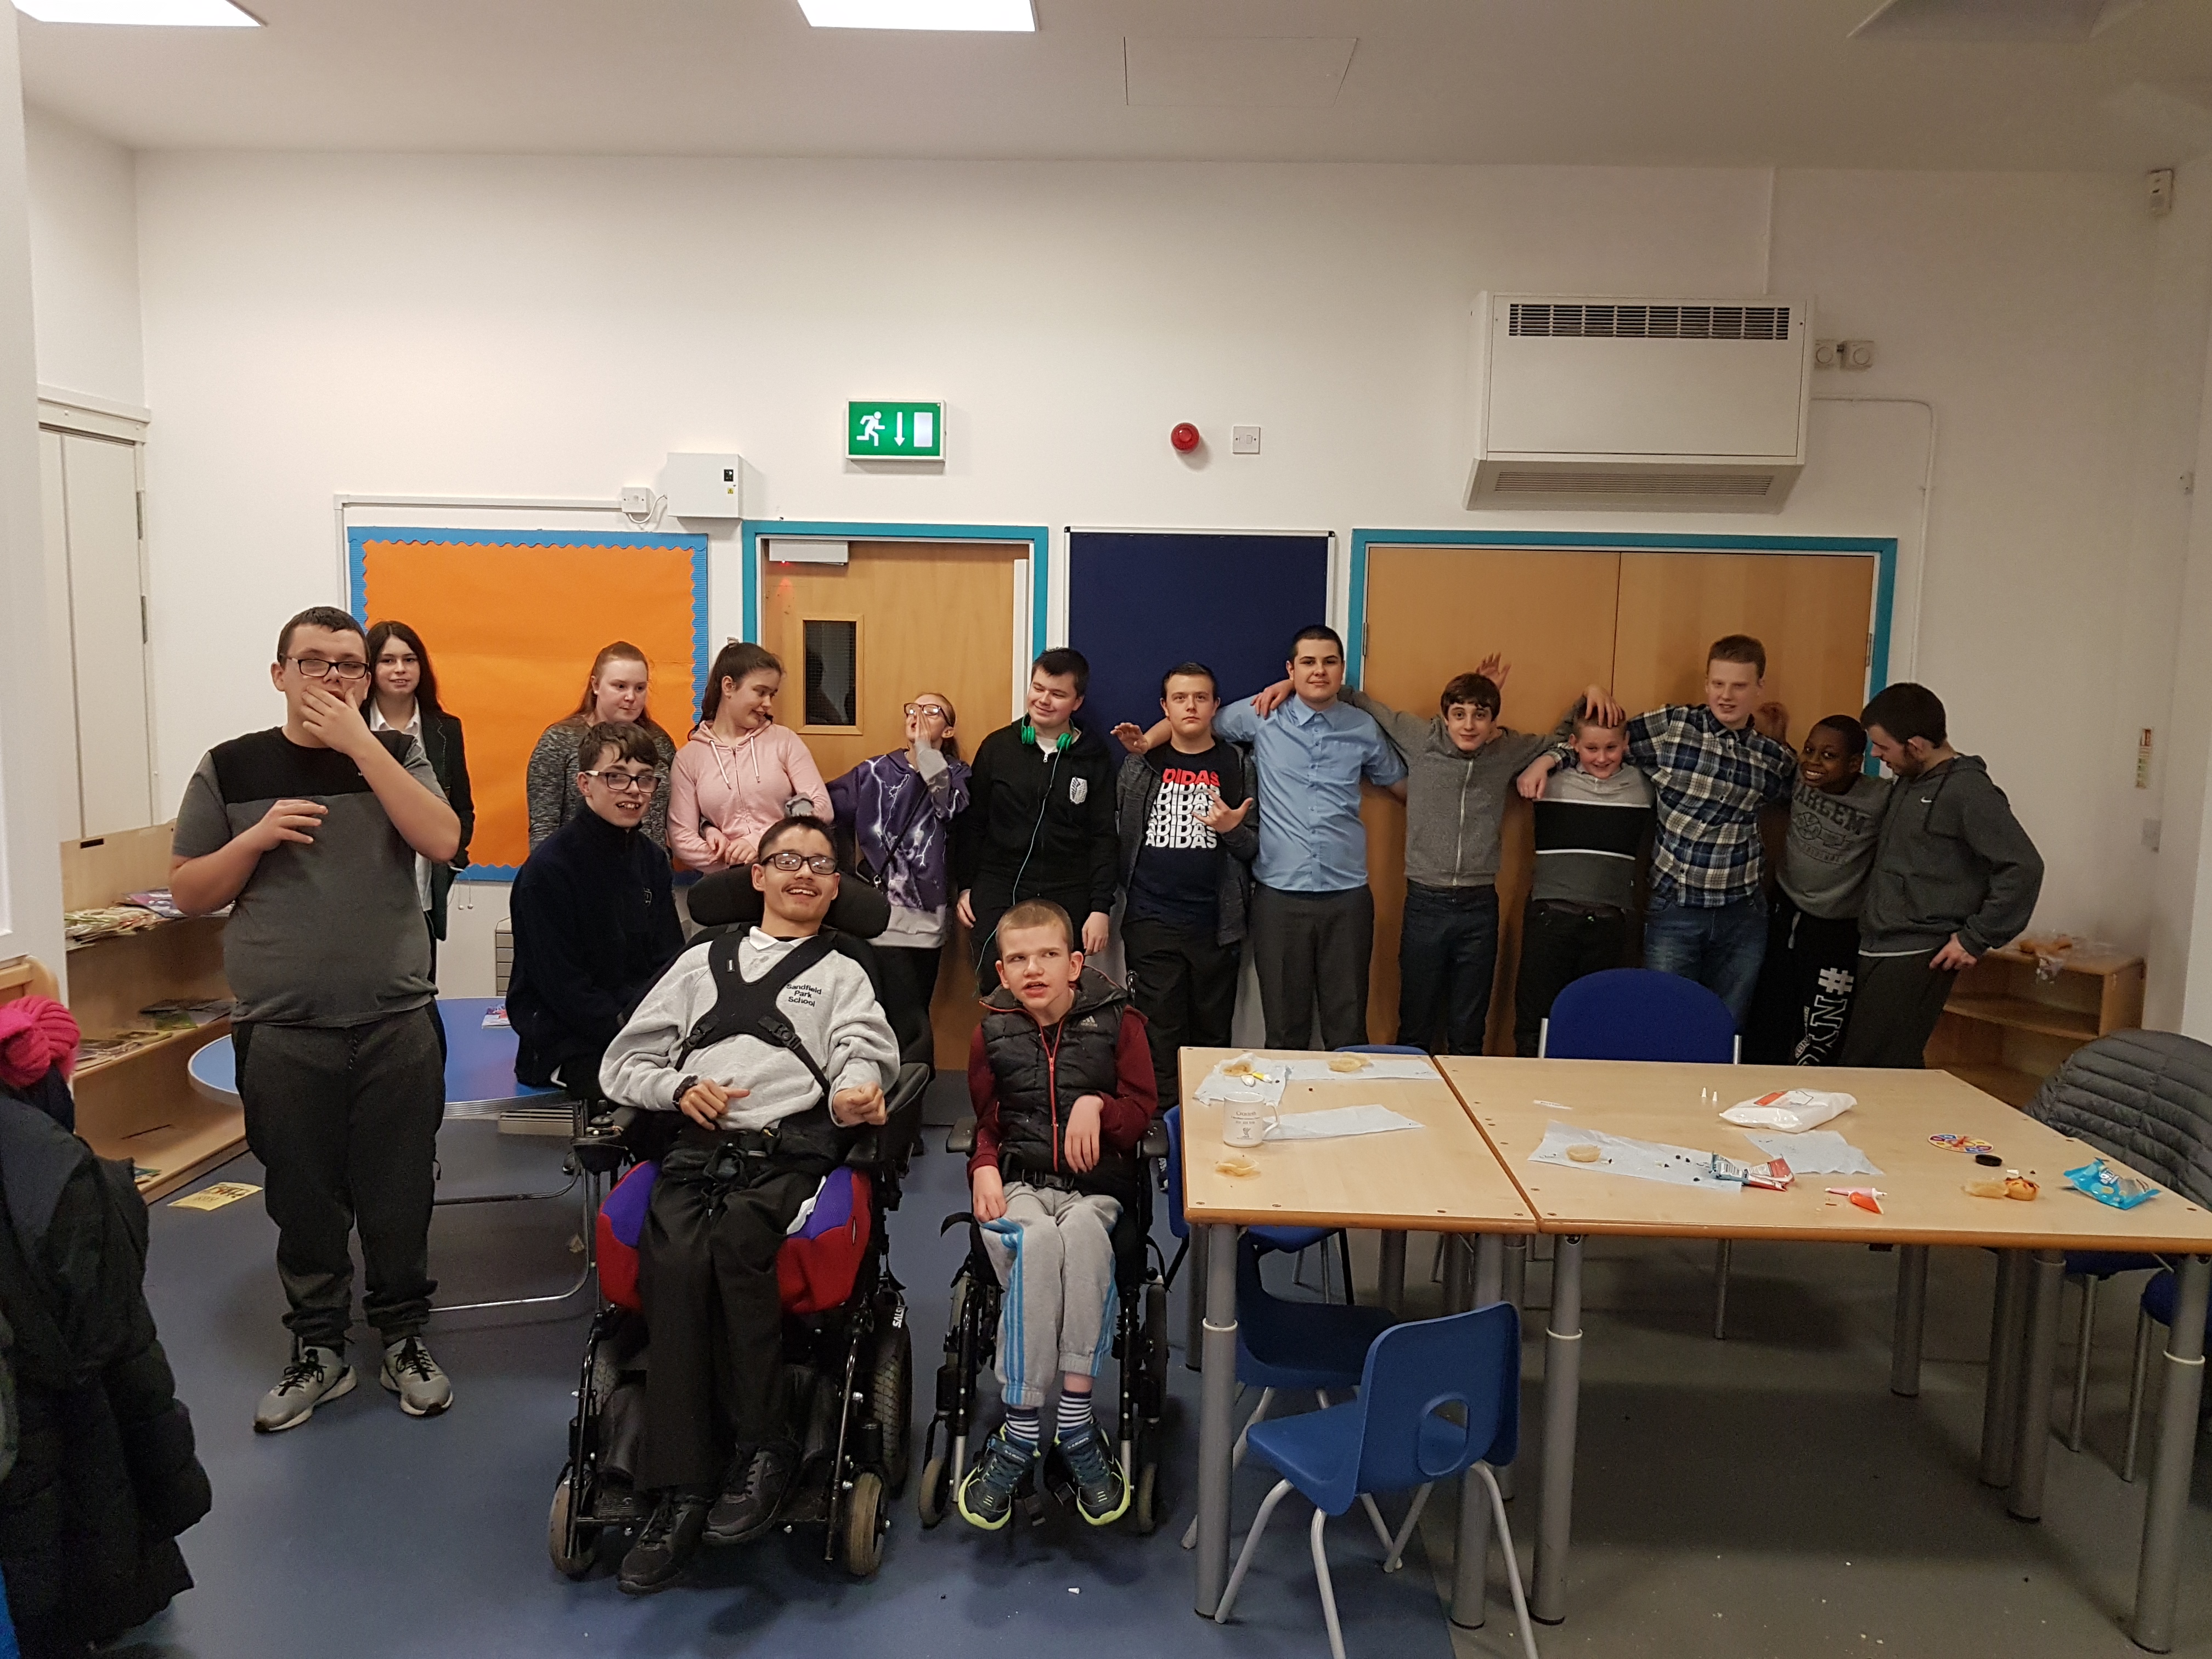 Adult city council disability learning liverpool